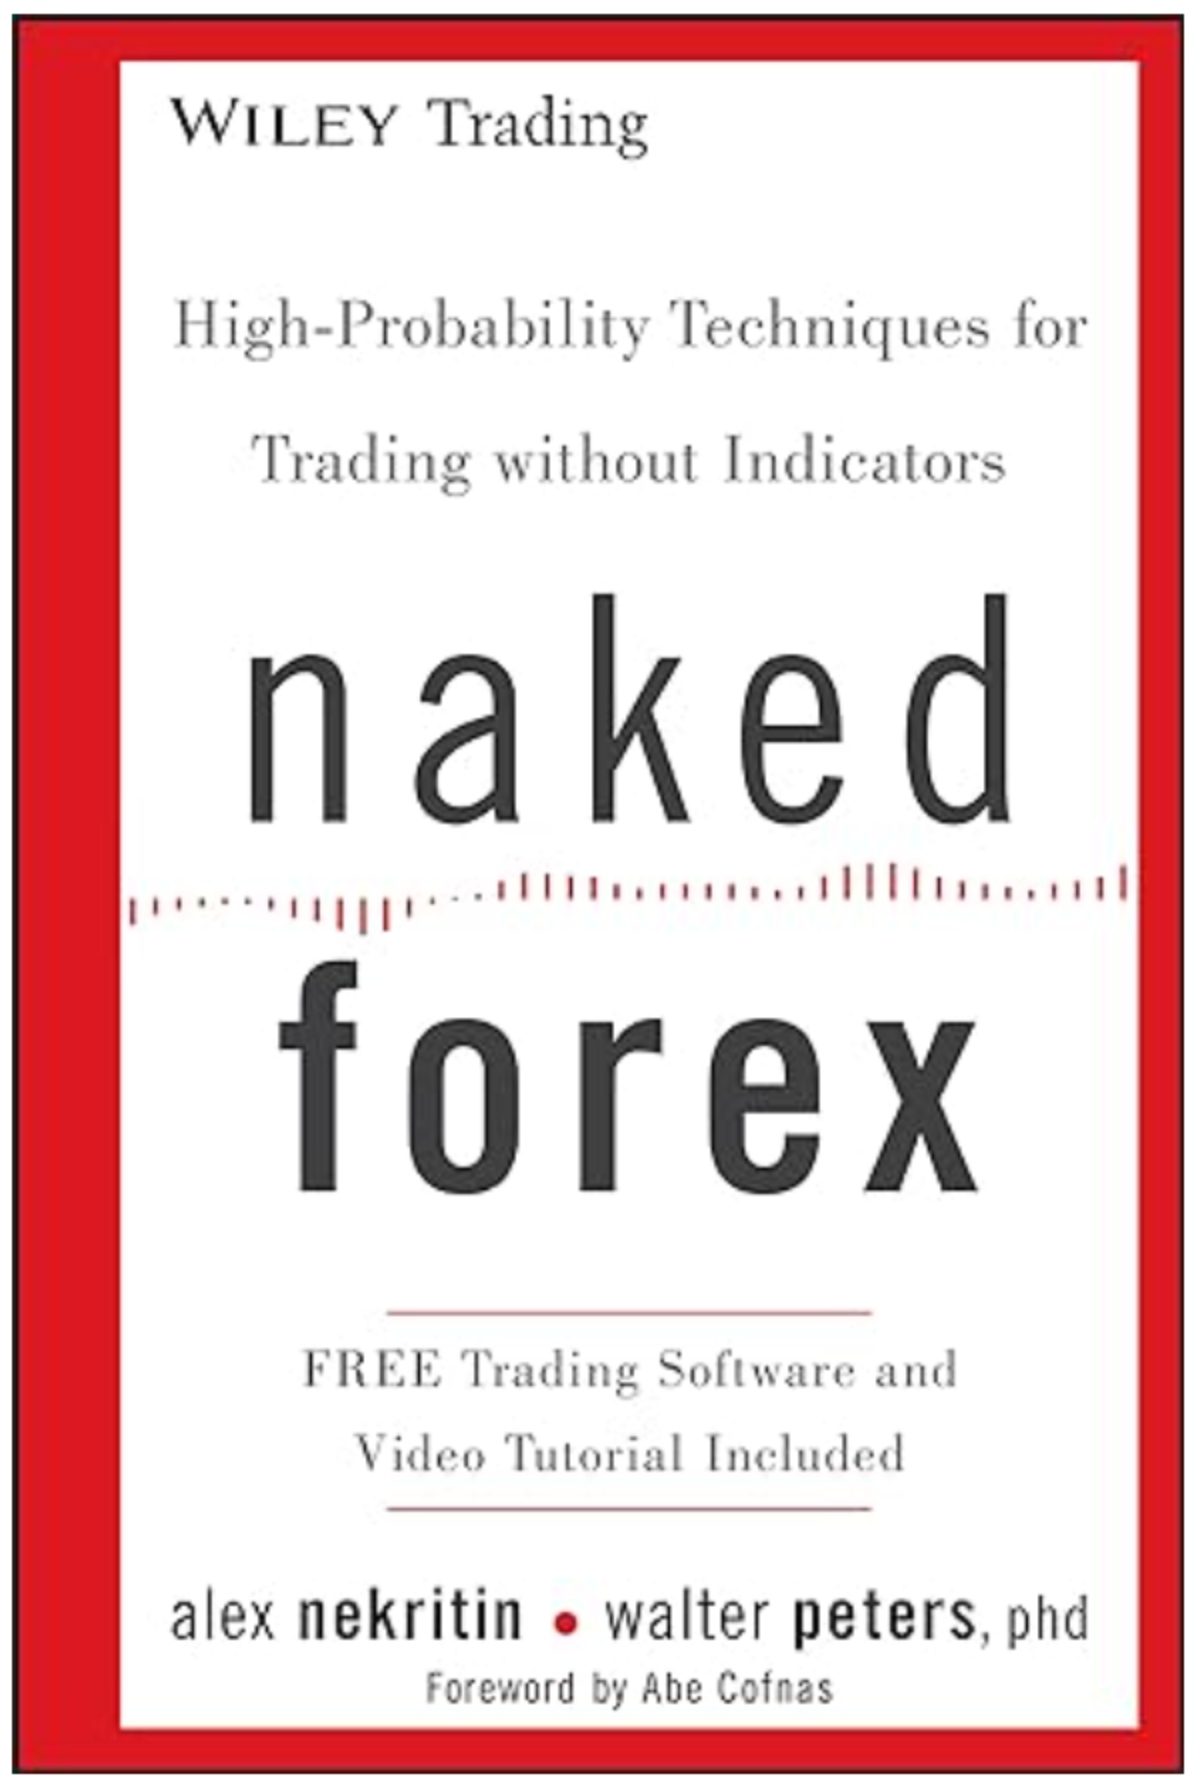 Top-rated forex books without indicators